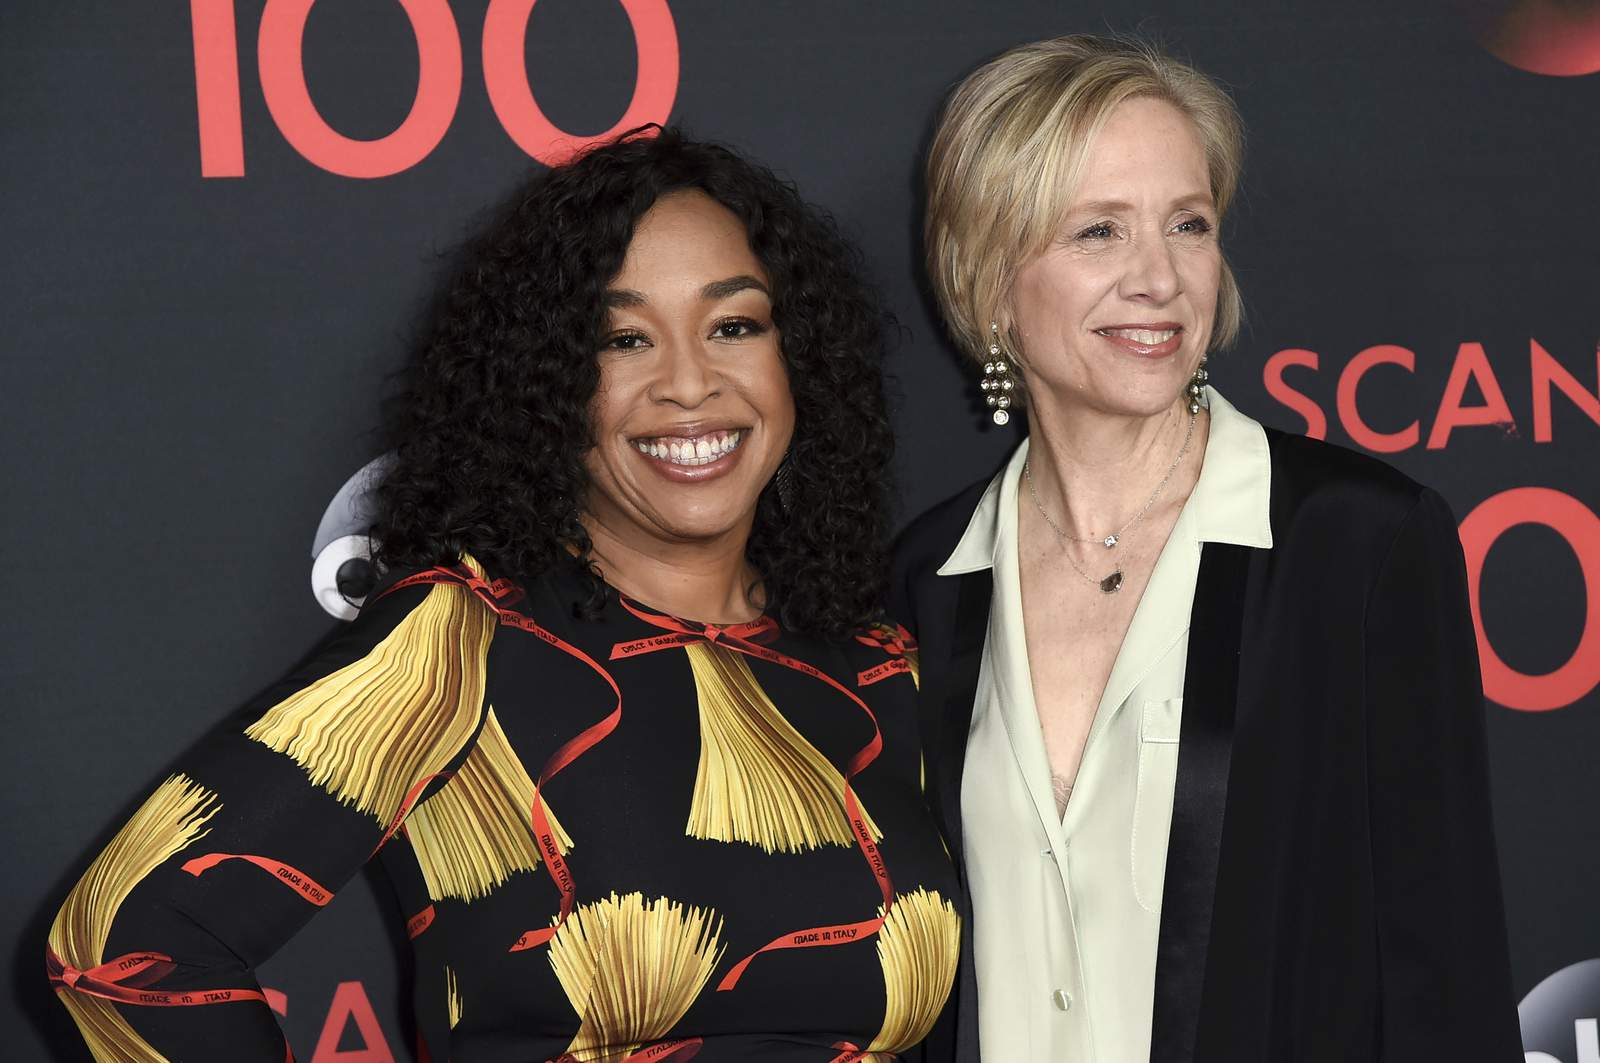 Costume Designers Guild to honor Shonda Rhimes, Betsy Beers